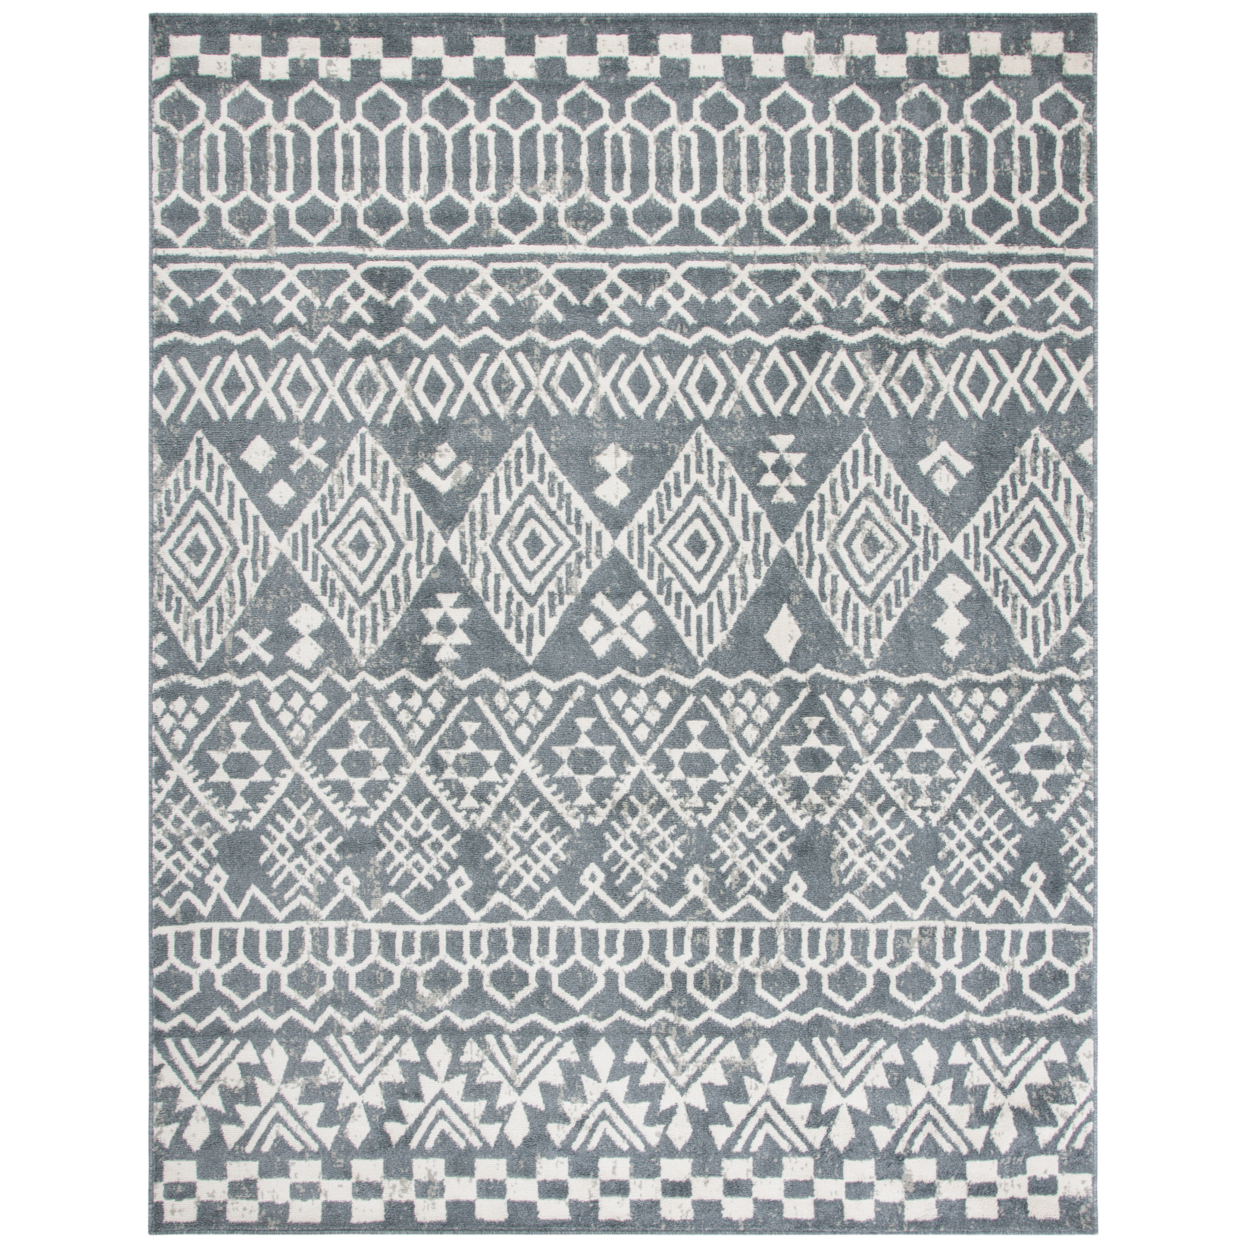 SAFAVIEH Pyramid Collection PYR205A Ivory / Charcoal Rug - 8 X 10